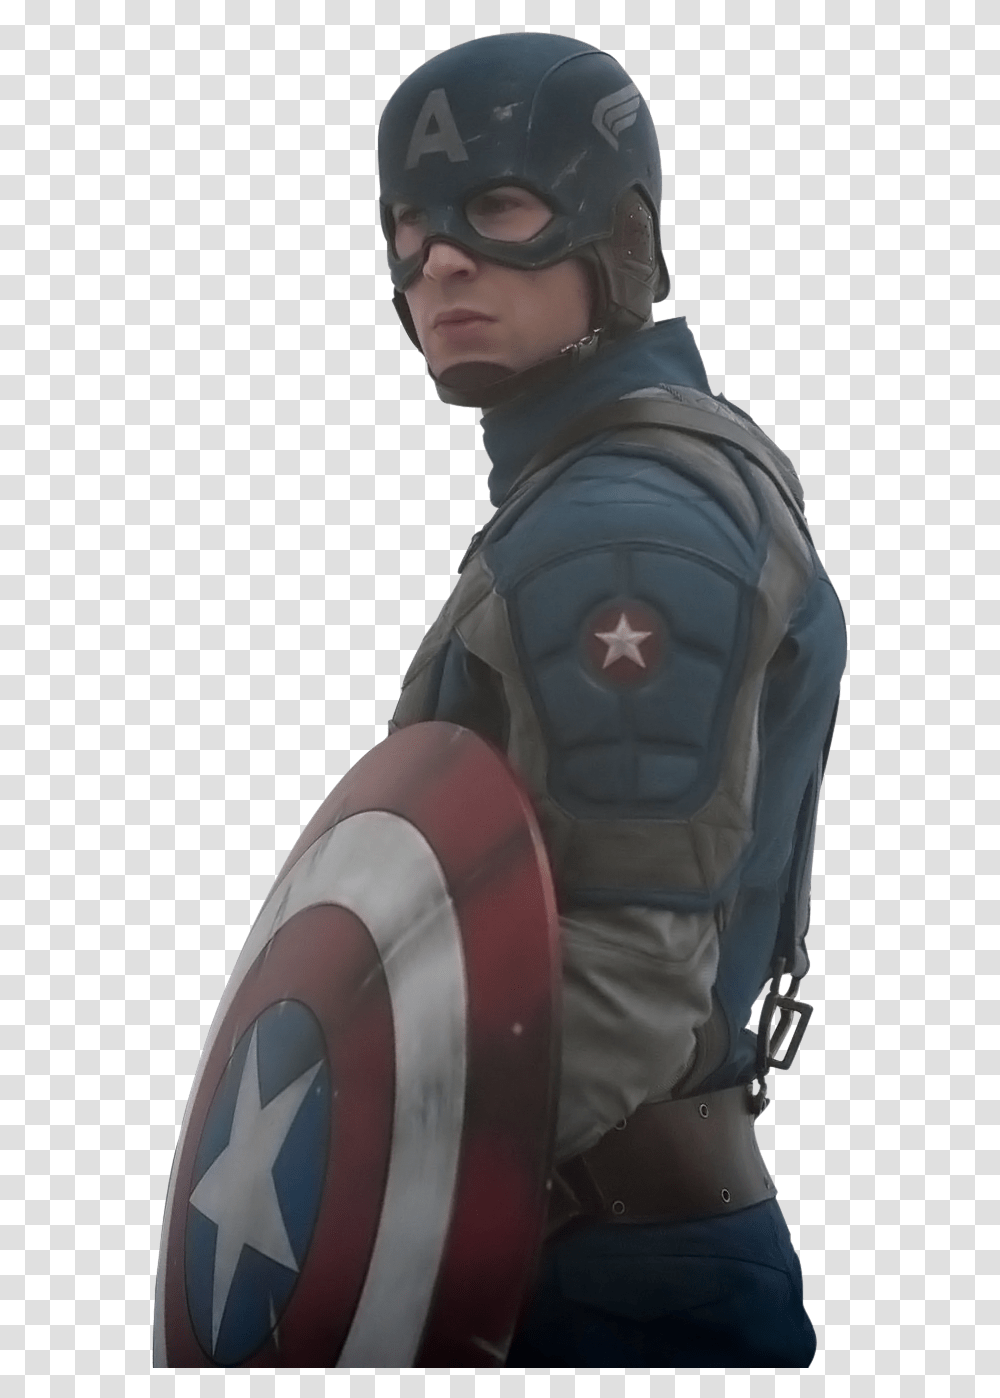 Capito Amrica Captain America The First Avenger Stills, Helmet, Apparel, Person Transparent Png